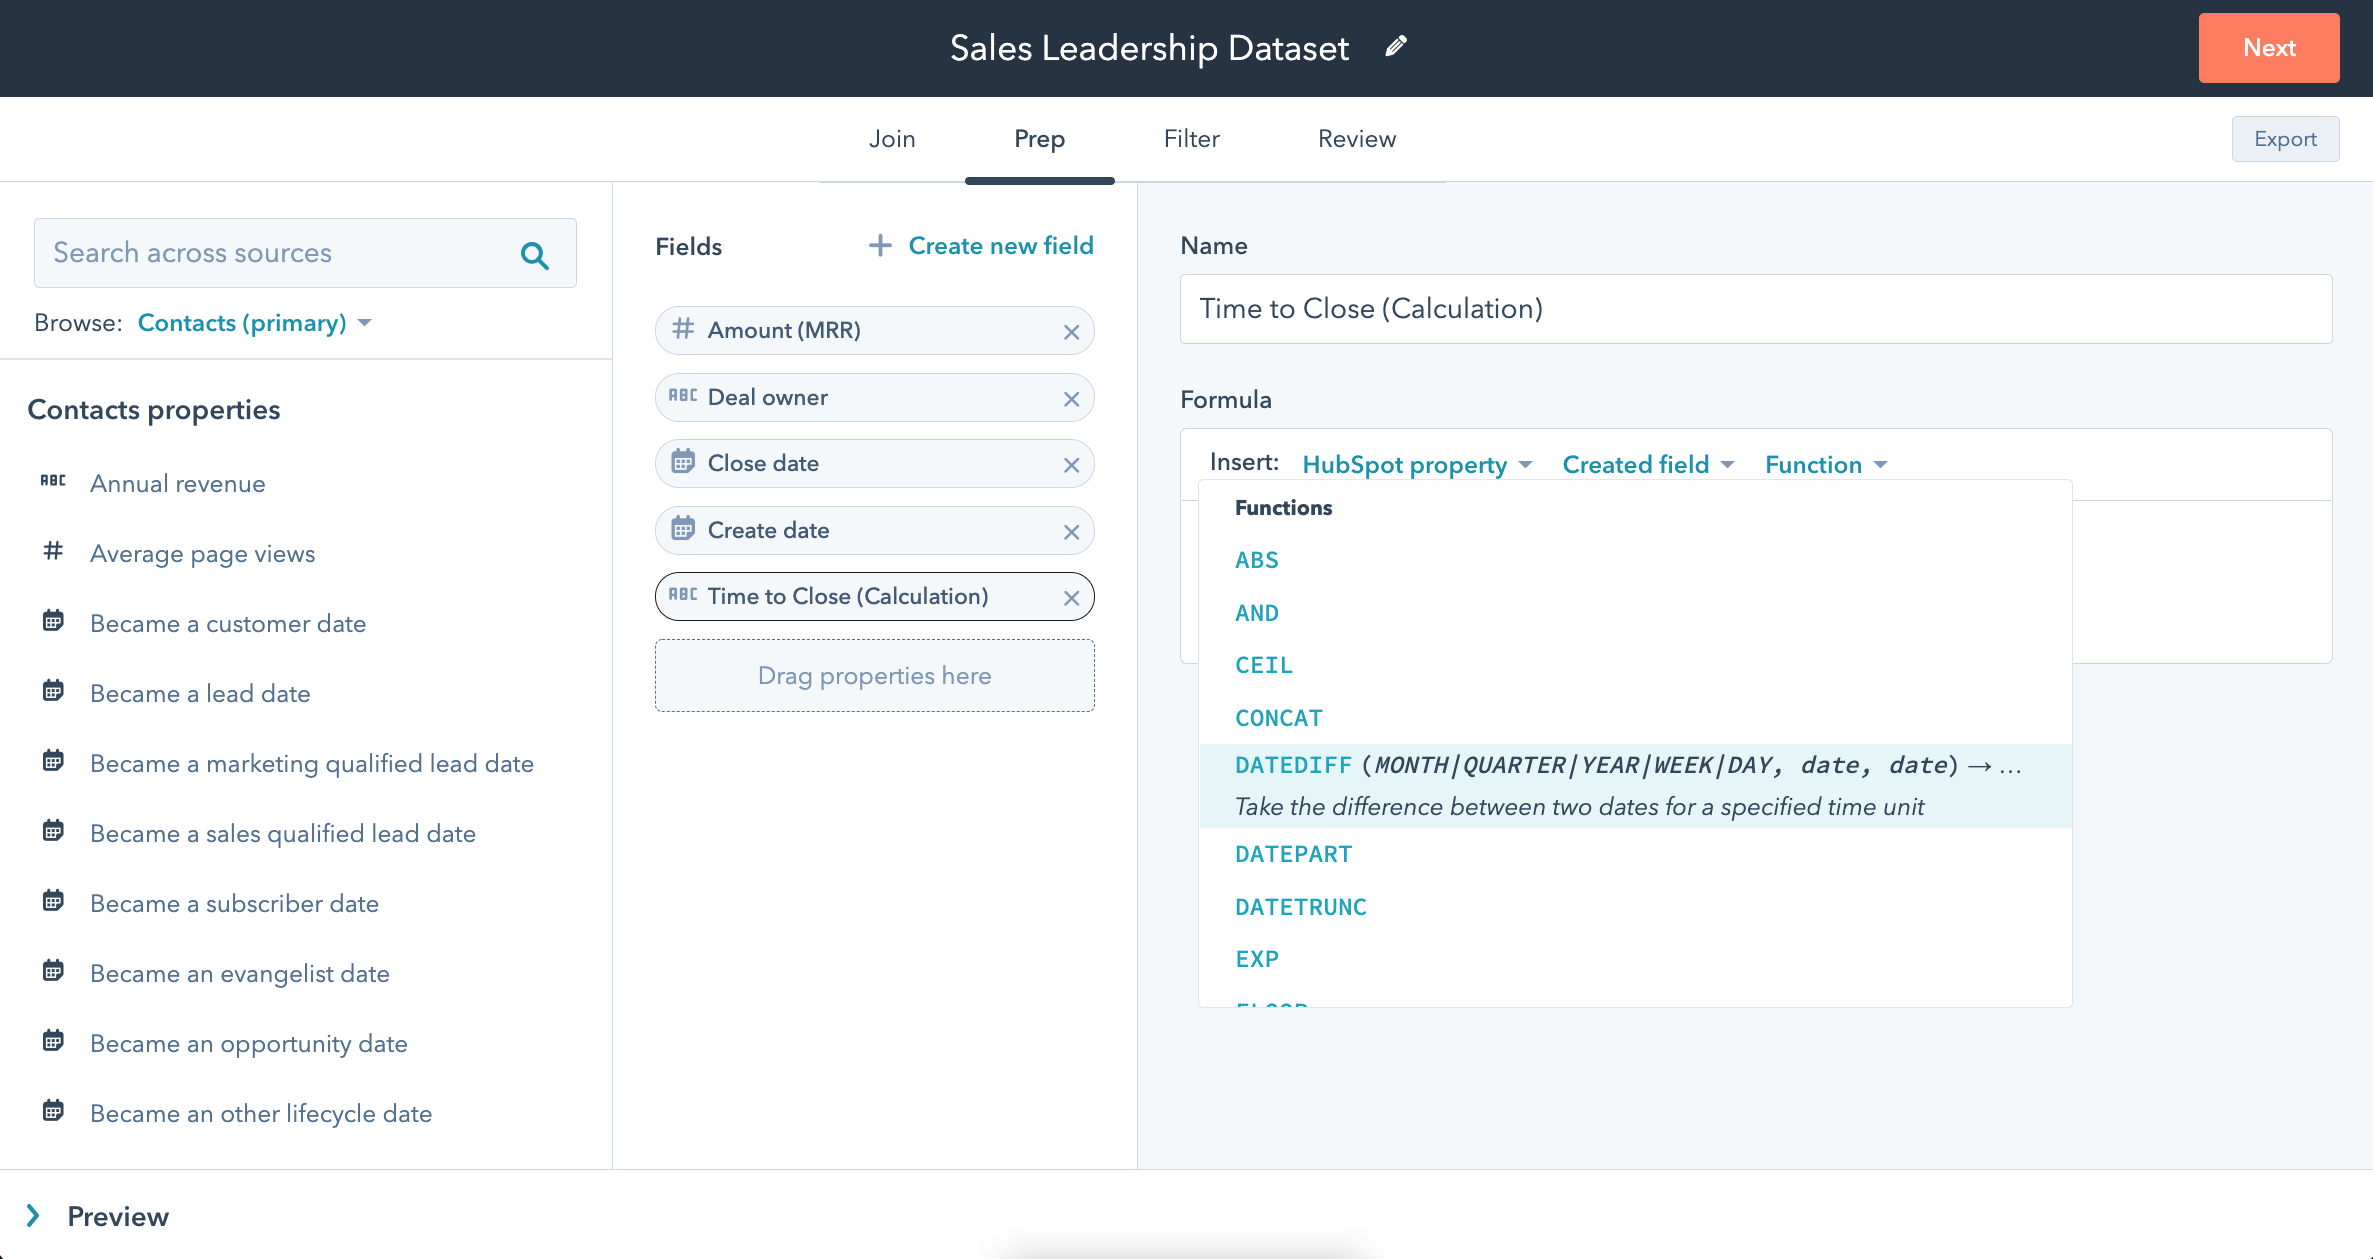 Screenshot of user curating a time to close (calculation) field in a sales leadership dataset.